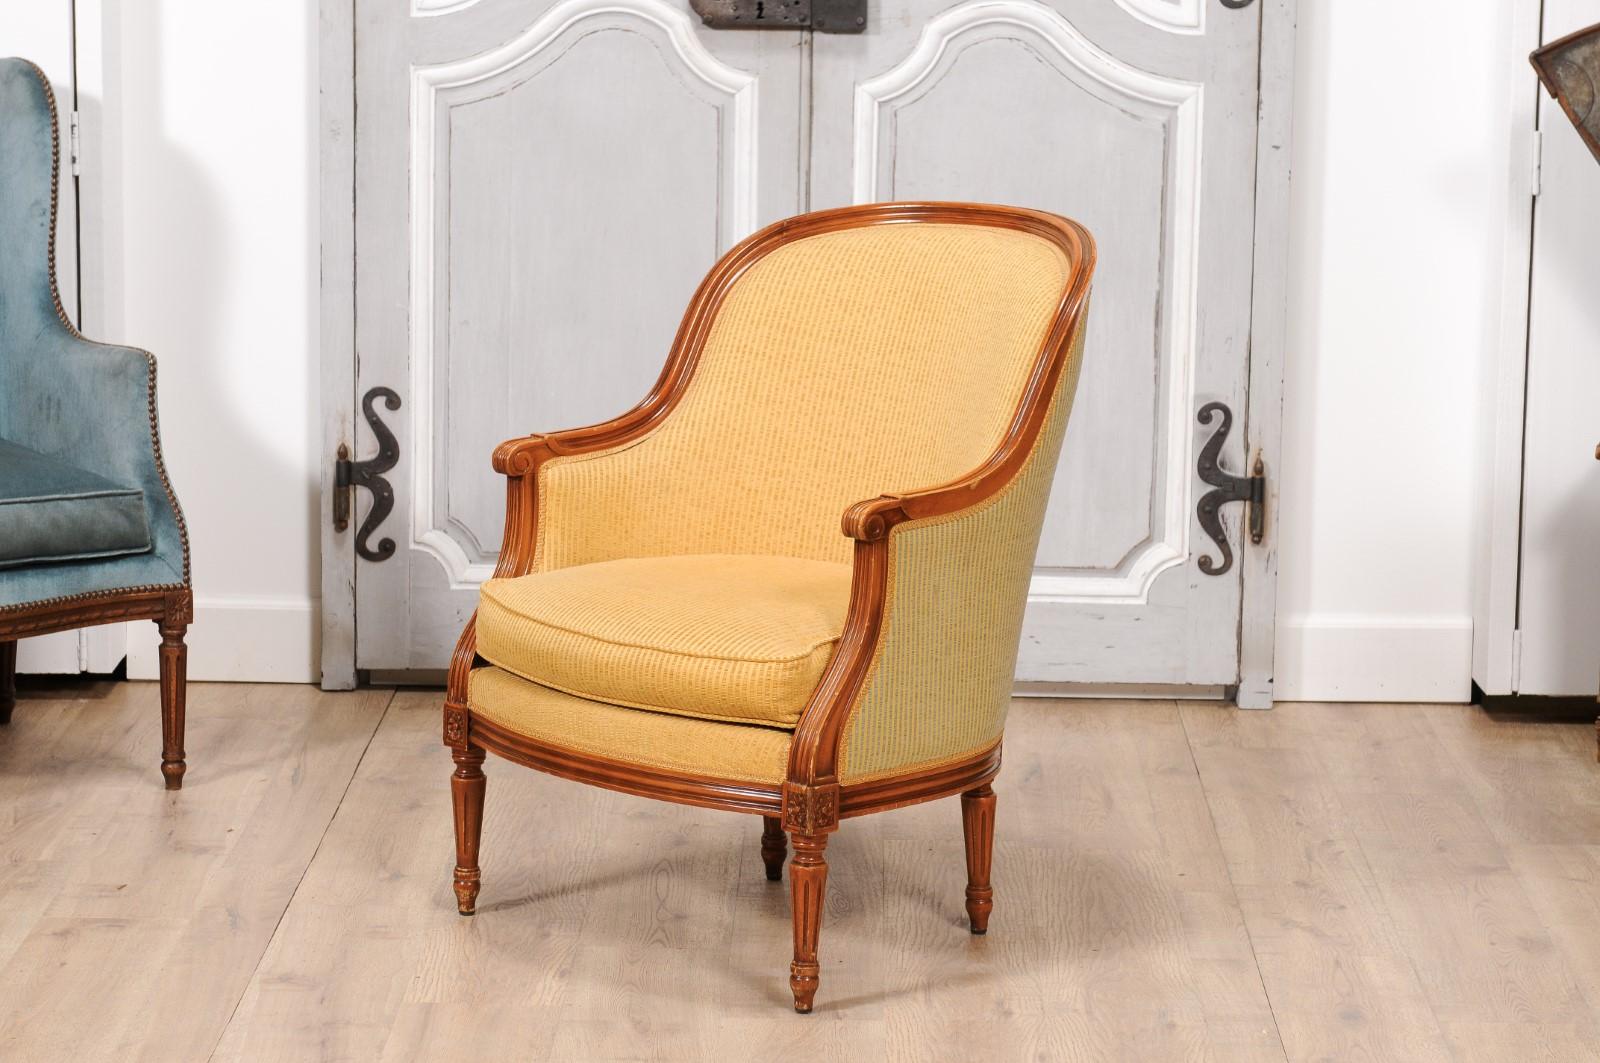 French Louis XVI Style Walnut Bergères Chairs with Wraparound Backs, Pair For Sale 4